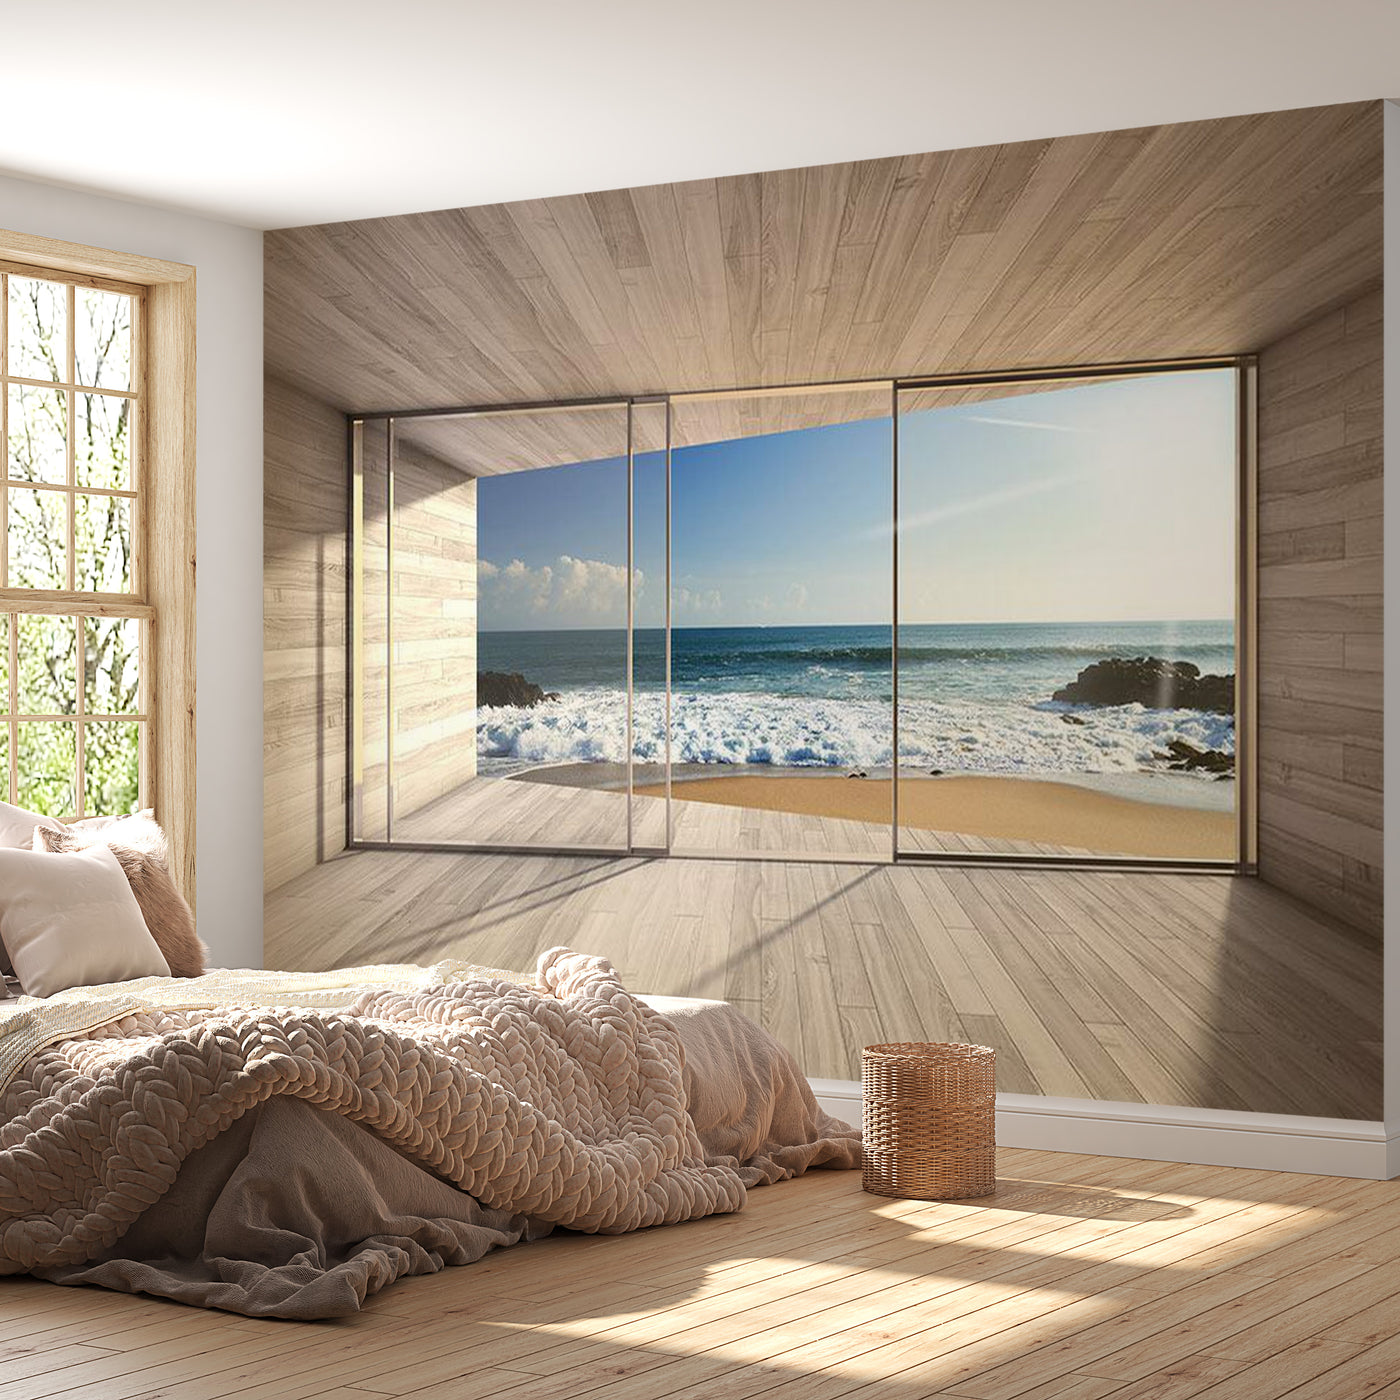 Peel & Stick Beach Wall Mural - Finding A Dream - Removable Wall Decals